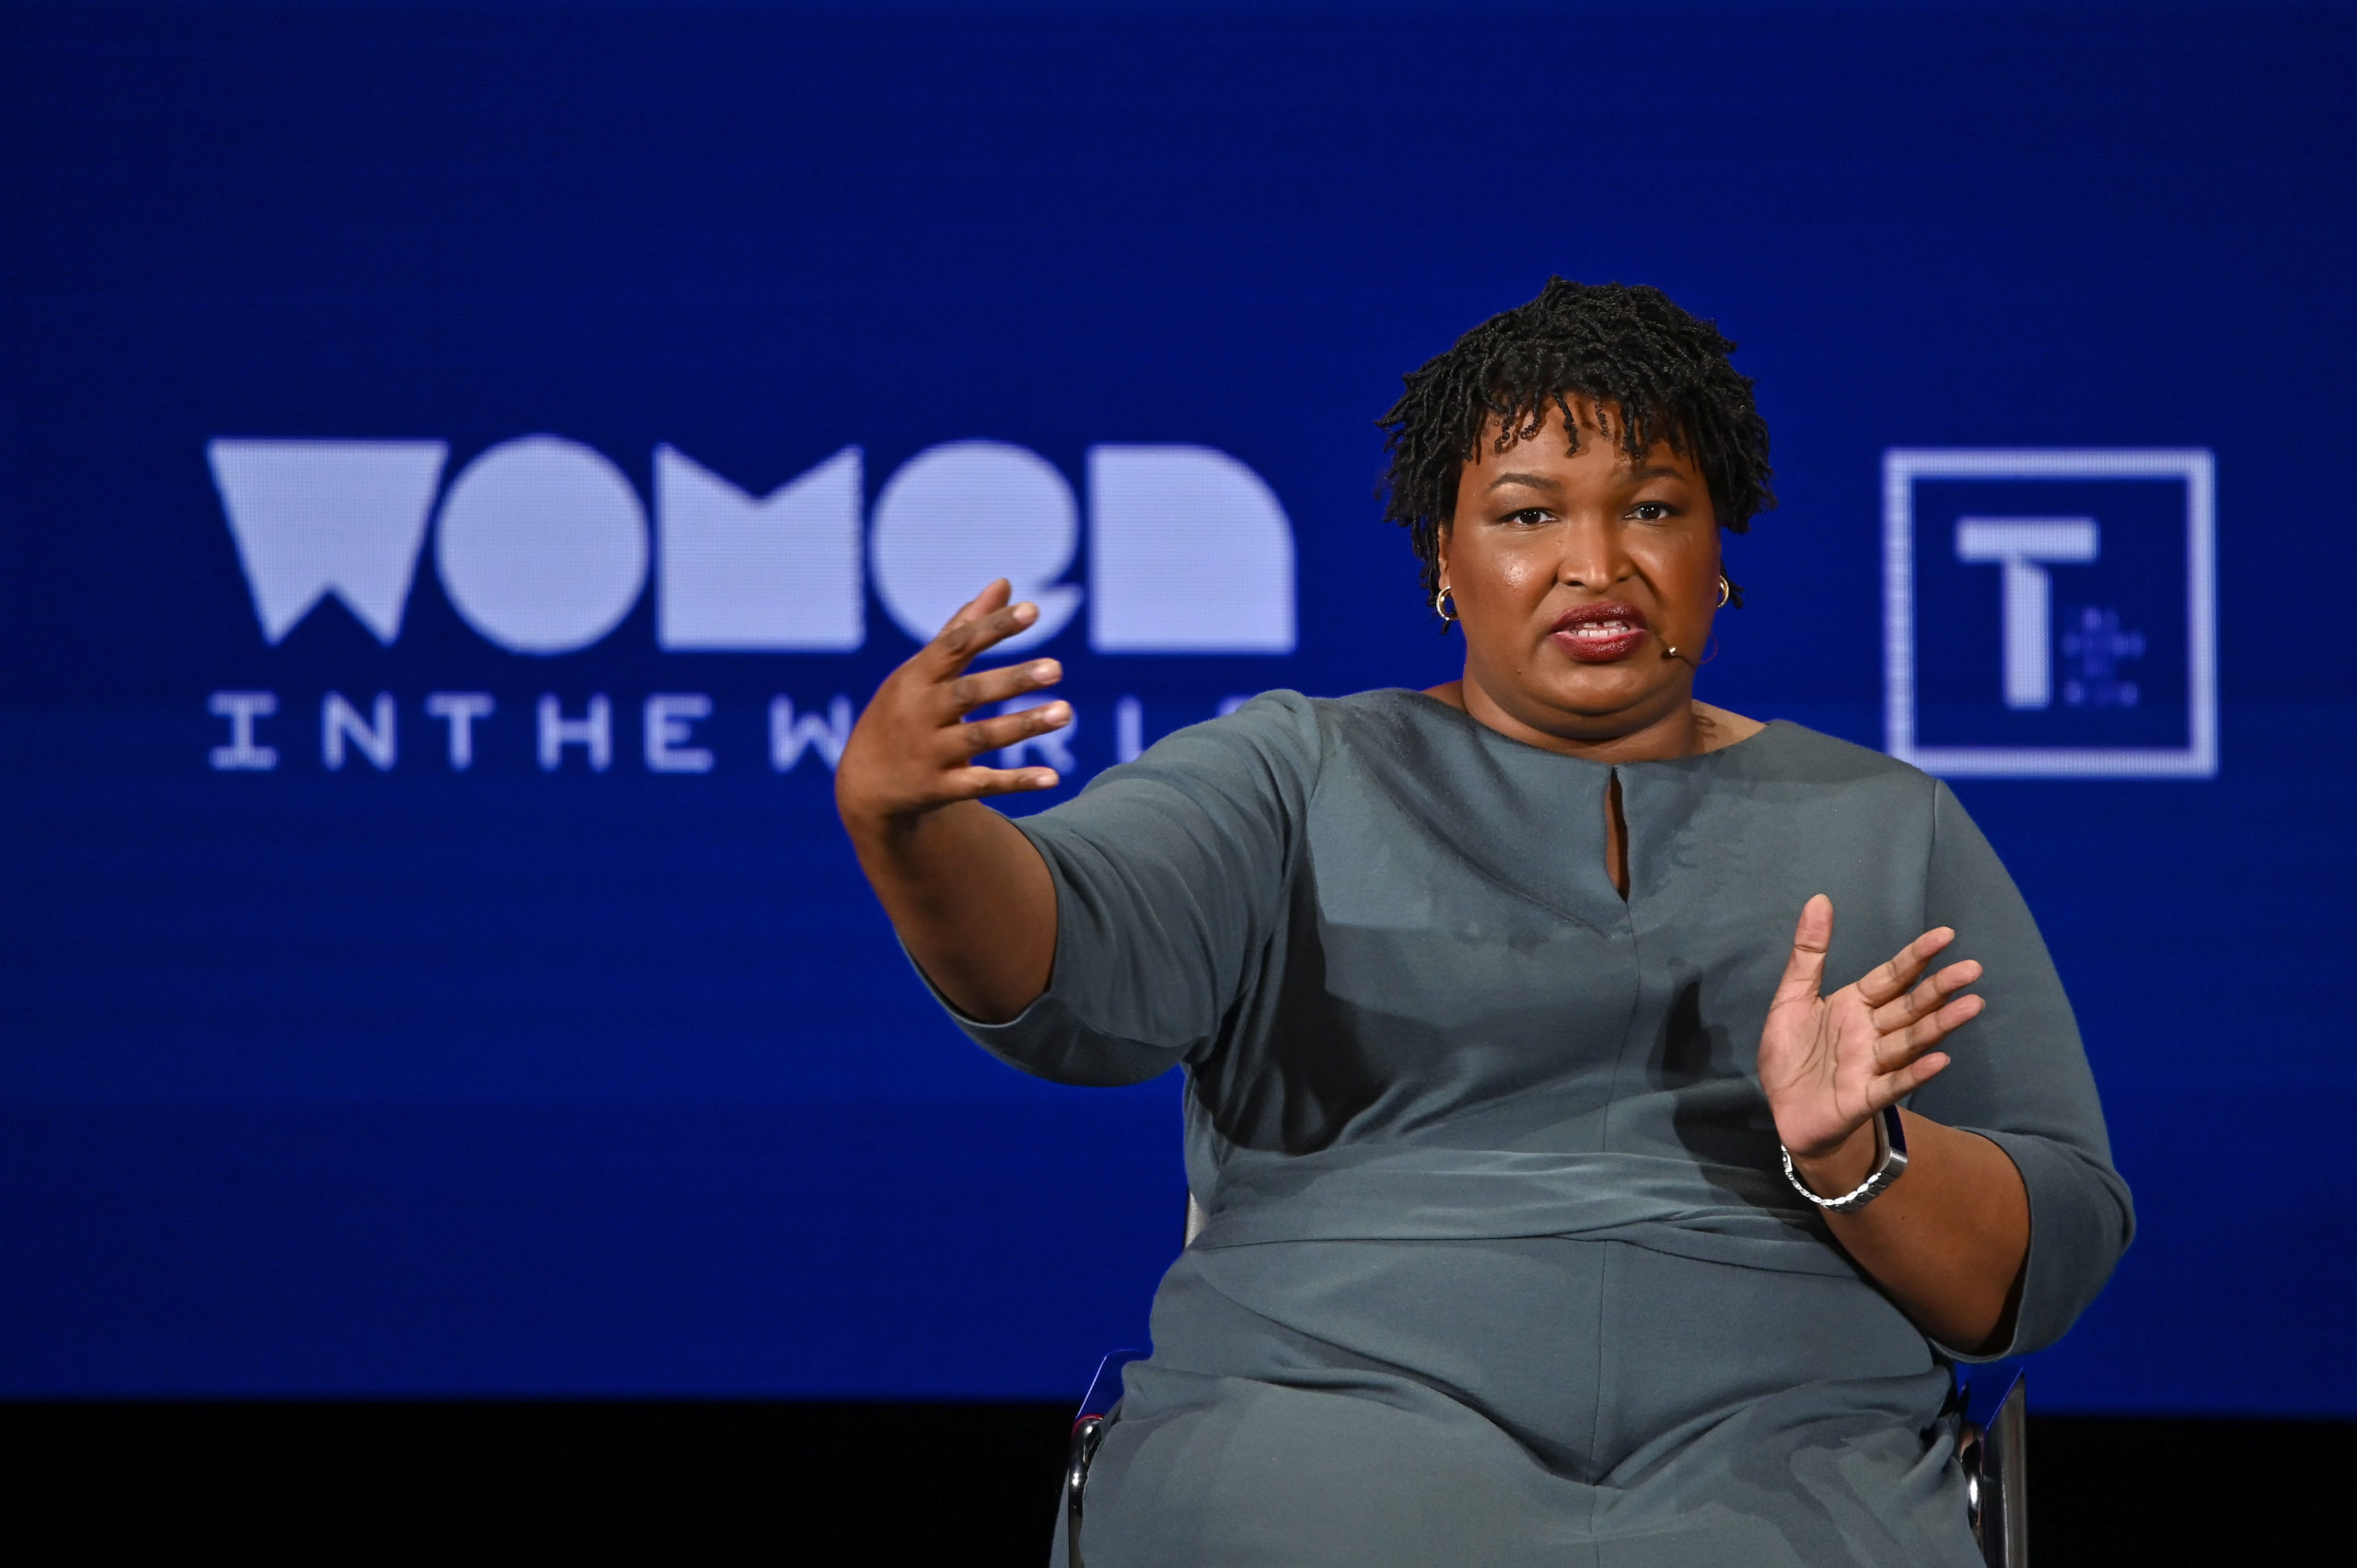 NEW YORK, NEW YORK - APRIL 11: Founder of Fair Fight, Stacey Abrams speaks onstage at the 10th Anniversary Women In The World Summit - Day 2 at David H. Koch Theater at Lincoln Center on April 11, 2019 in New York City. (Photo by Mike Coppola/Getty Images)